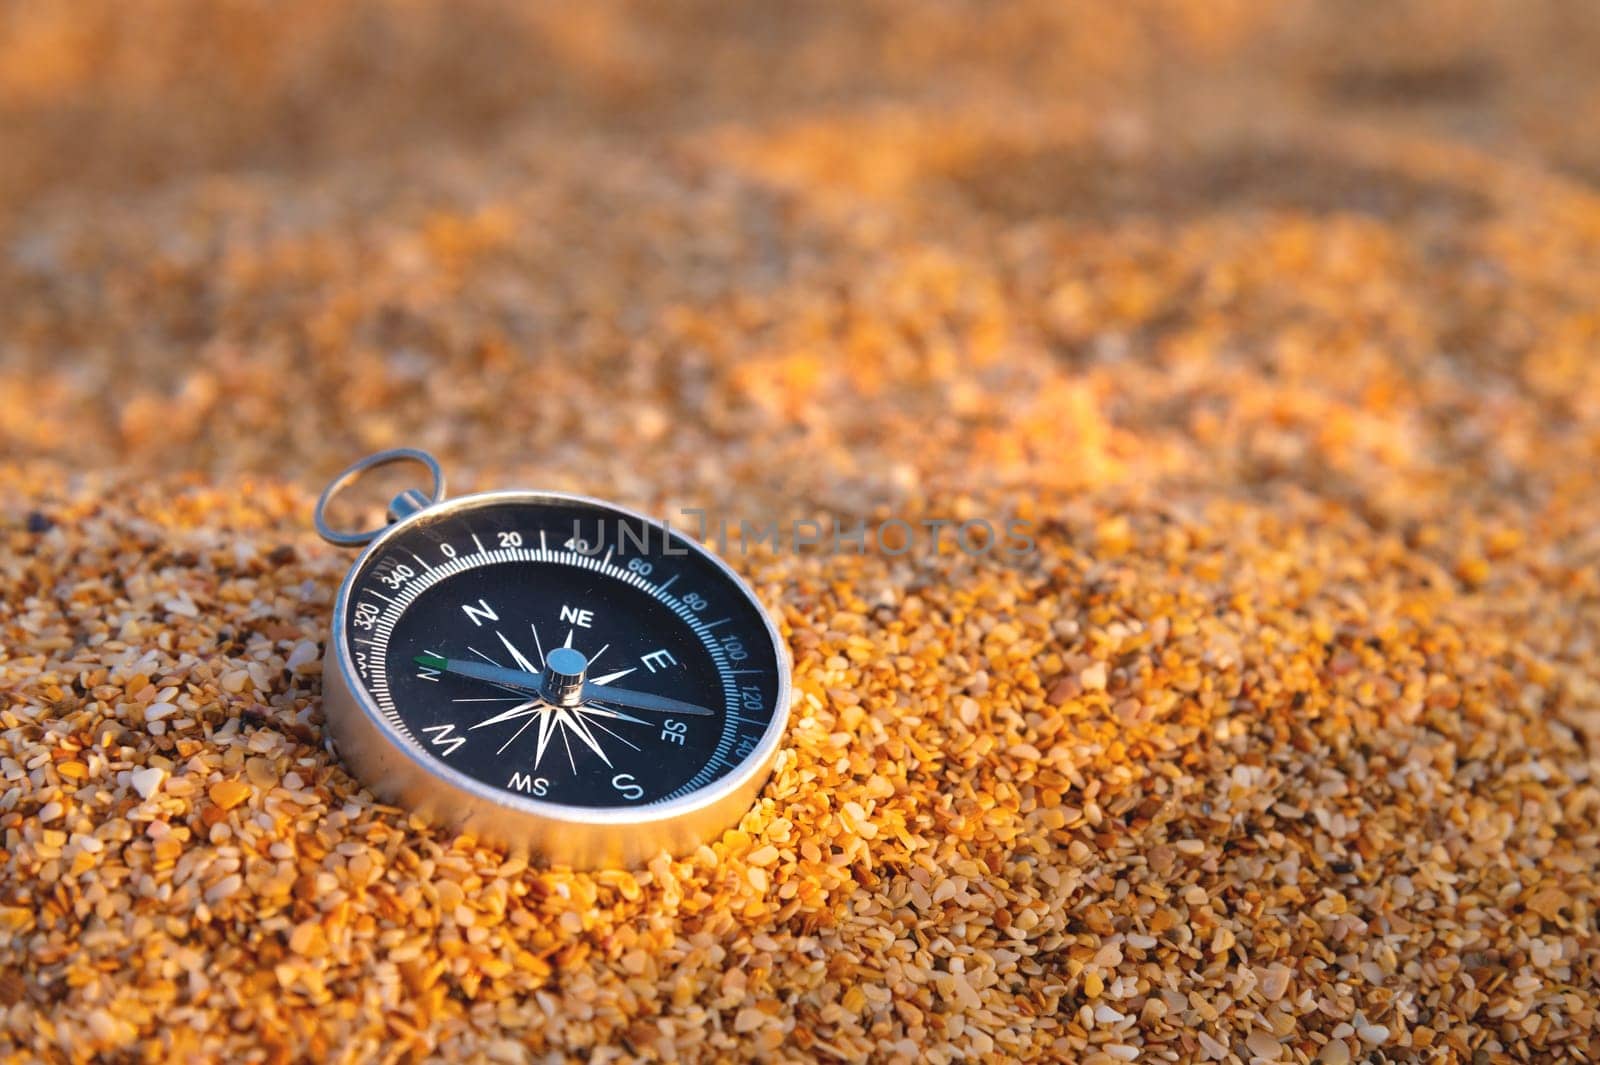 the compass lies on the golden sand, on the beach of shells on a sunny day.